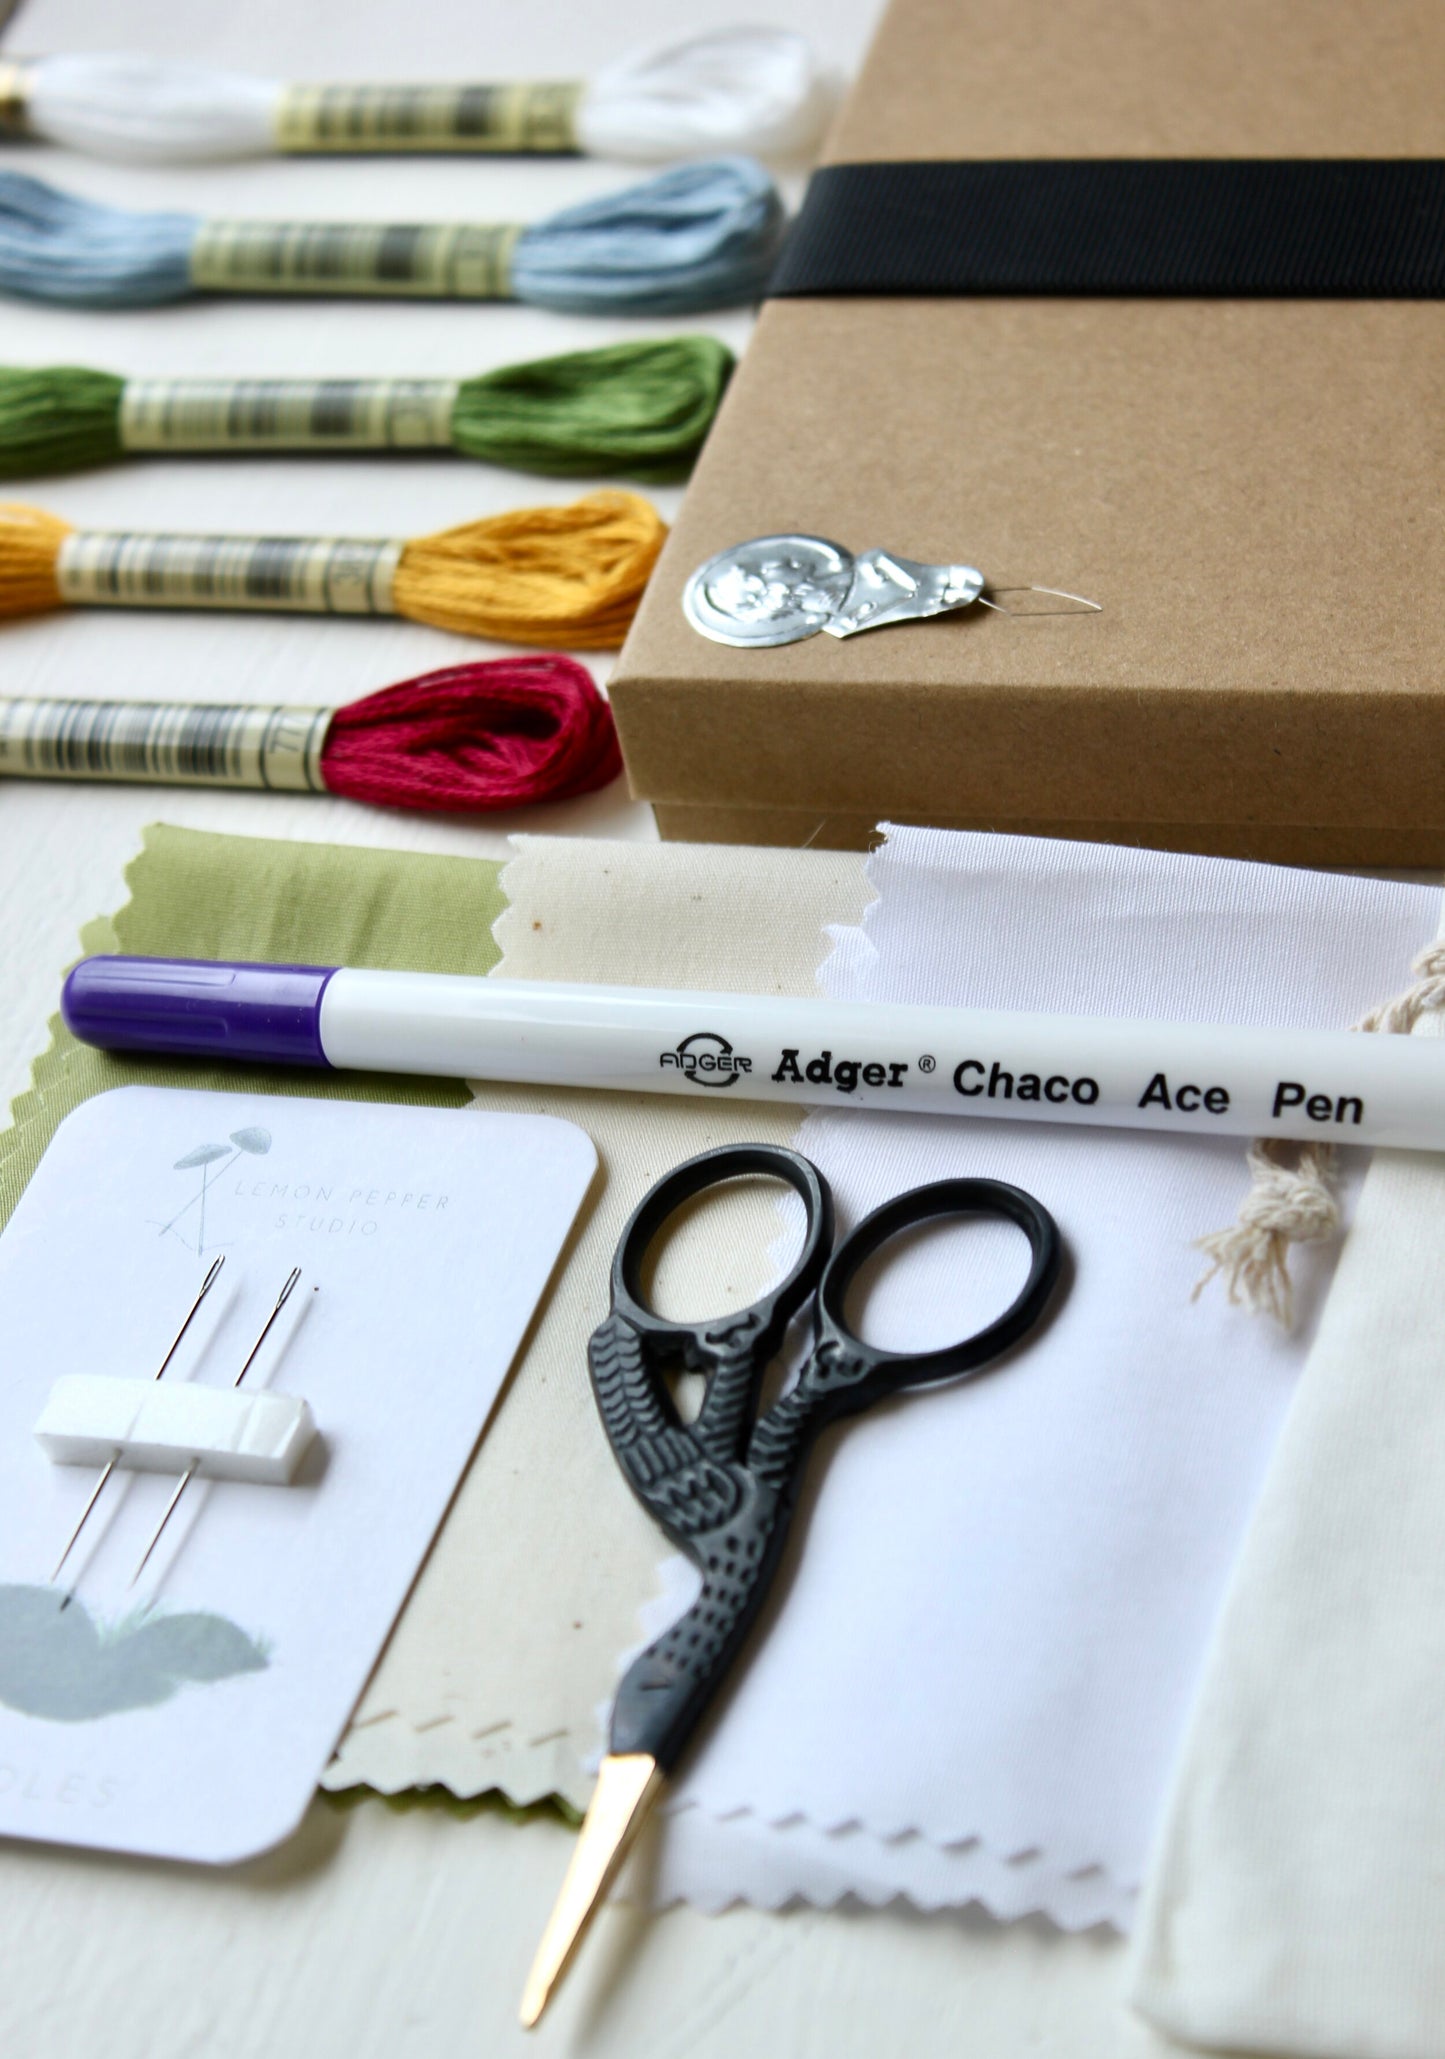 Embroidery Toolkit